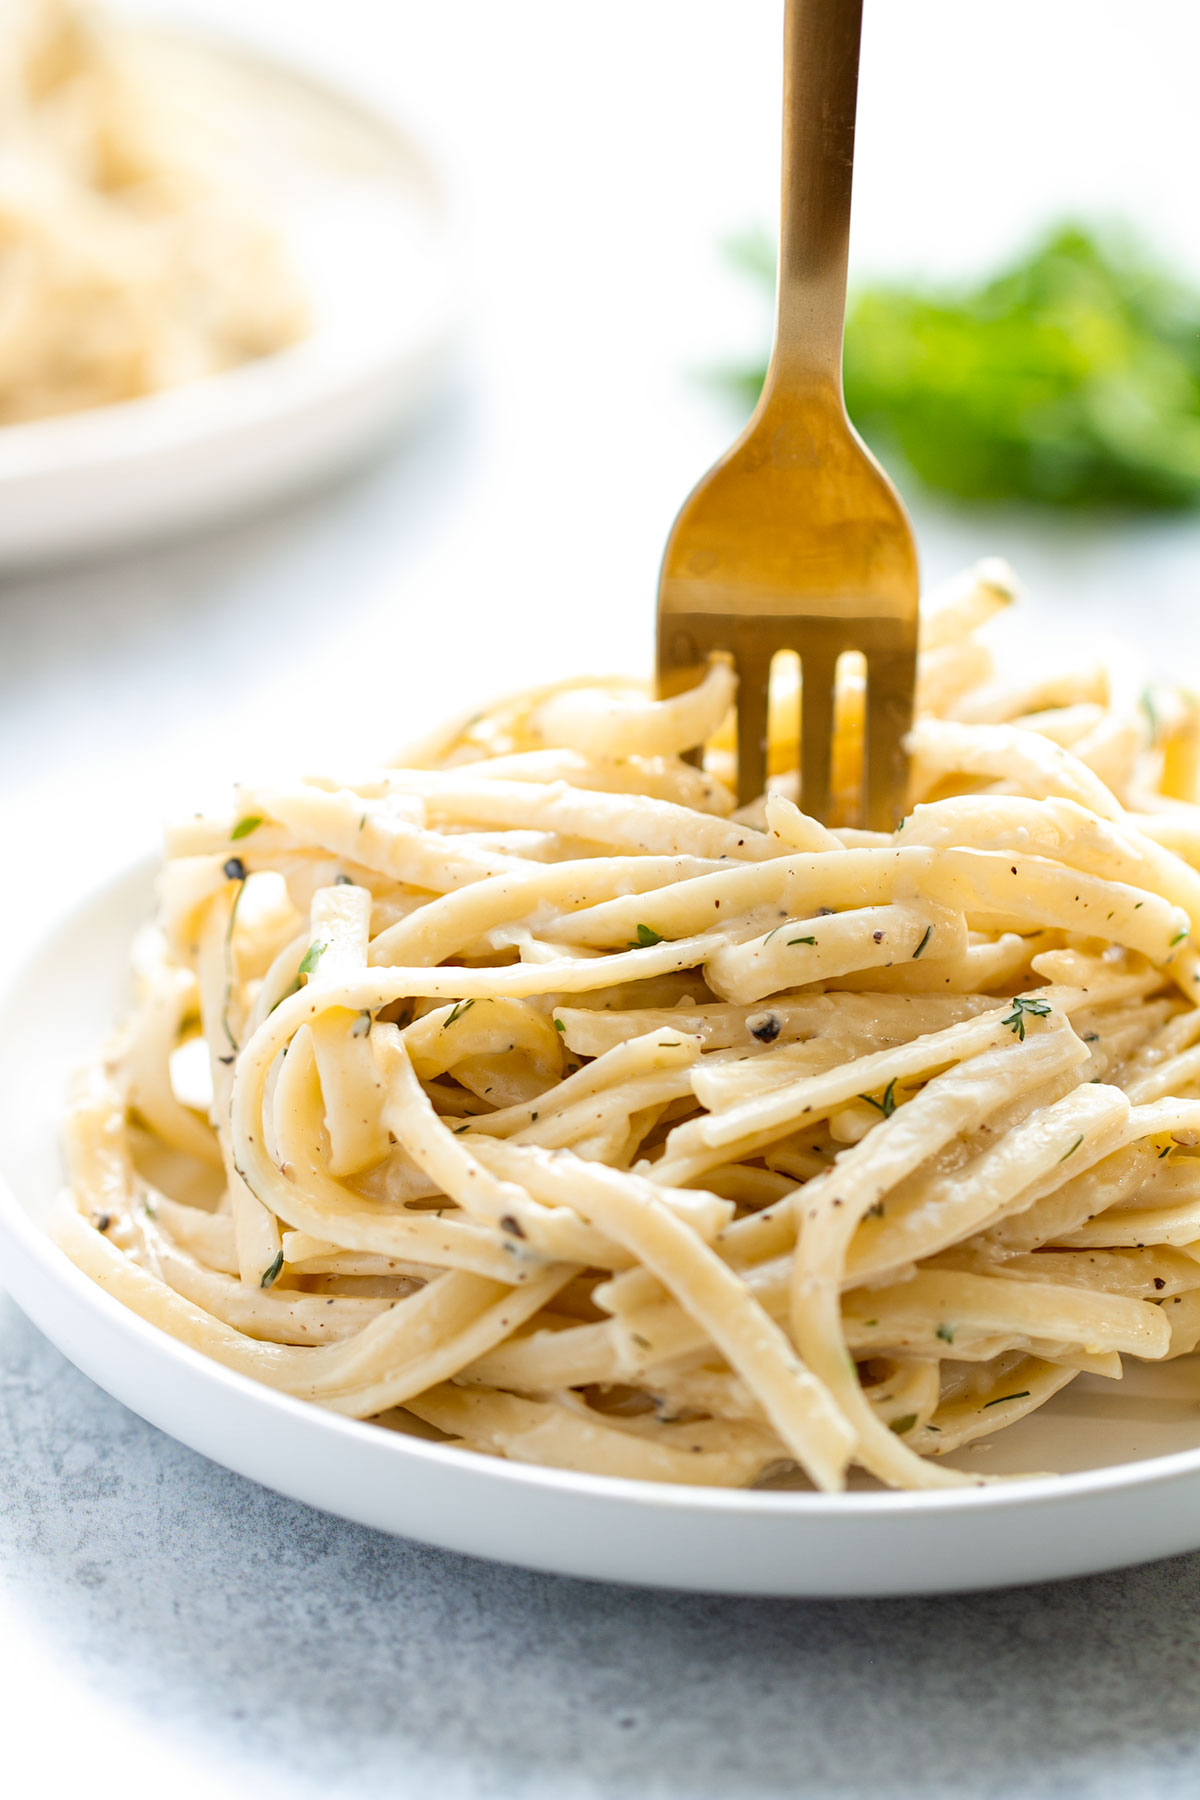 A plate of pasta with creamy white wine sauce on a pale blue background.